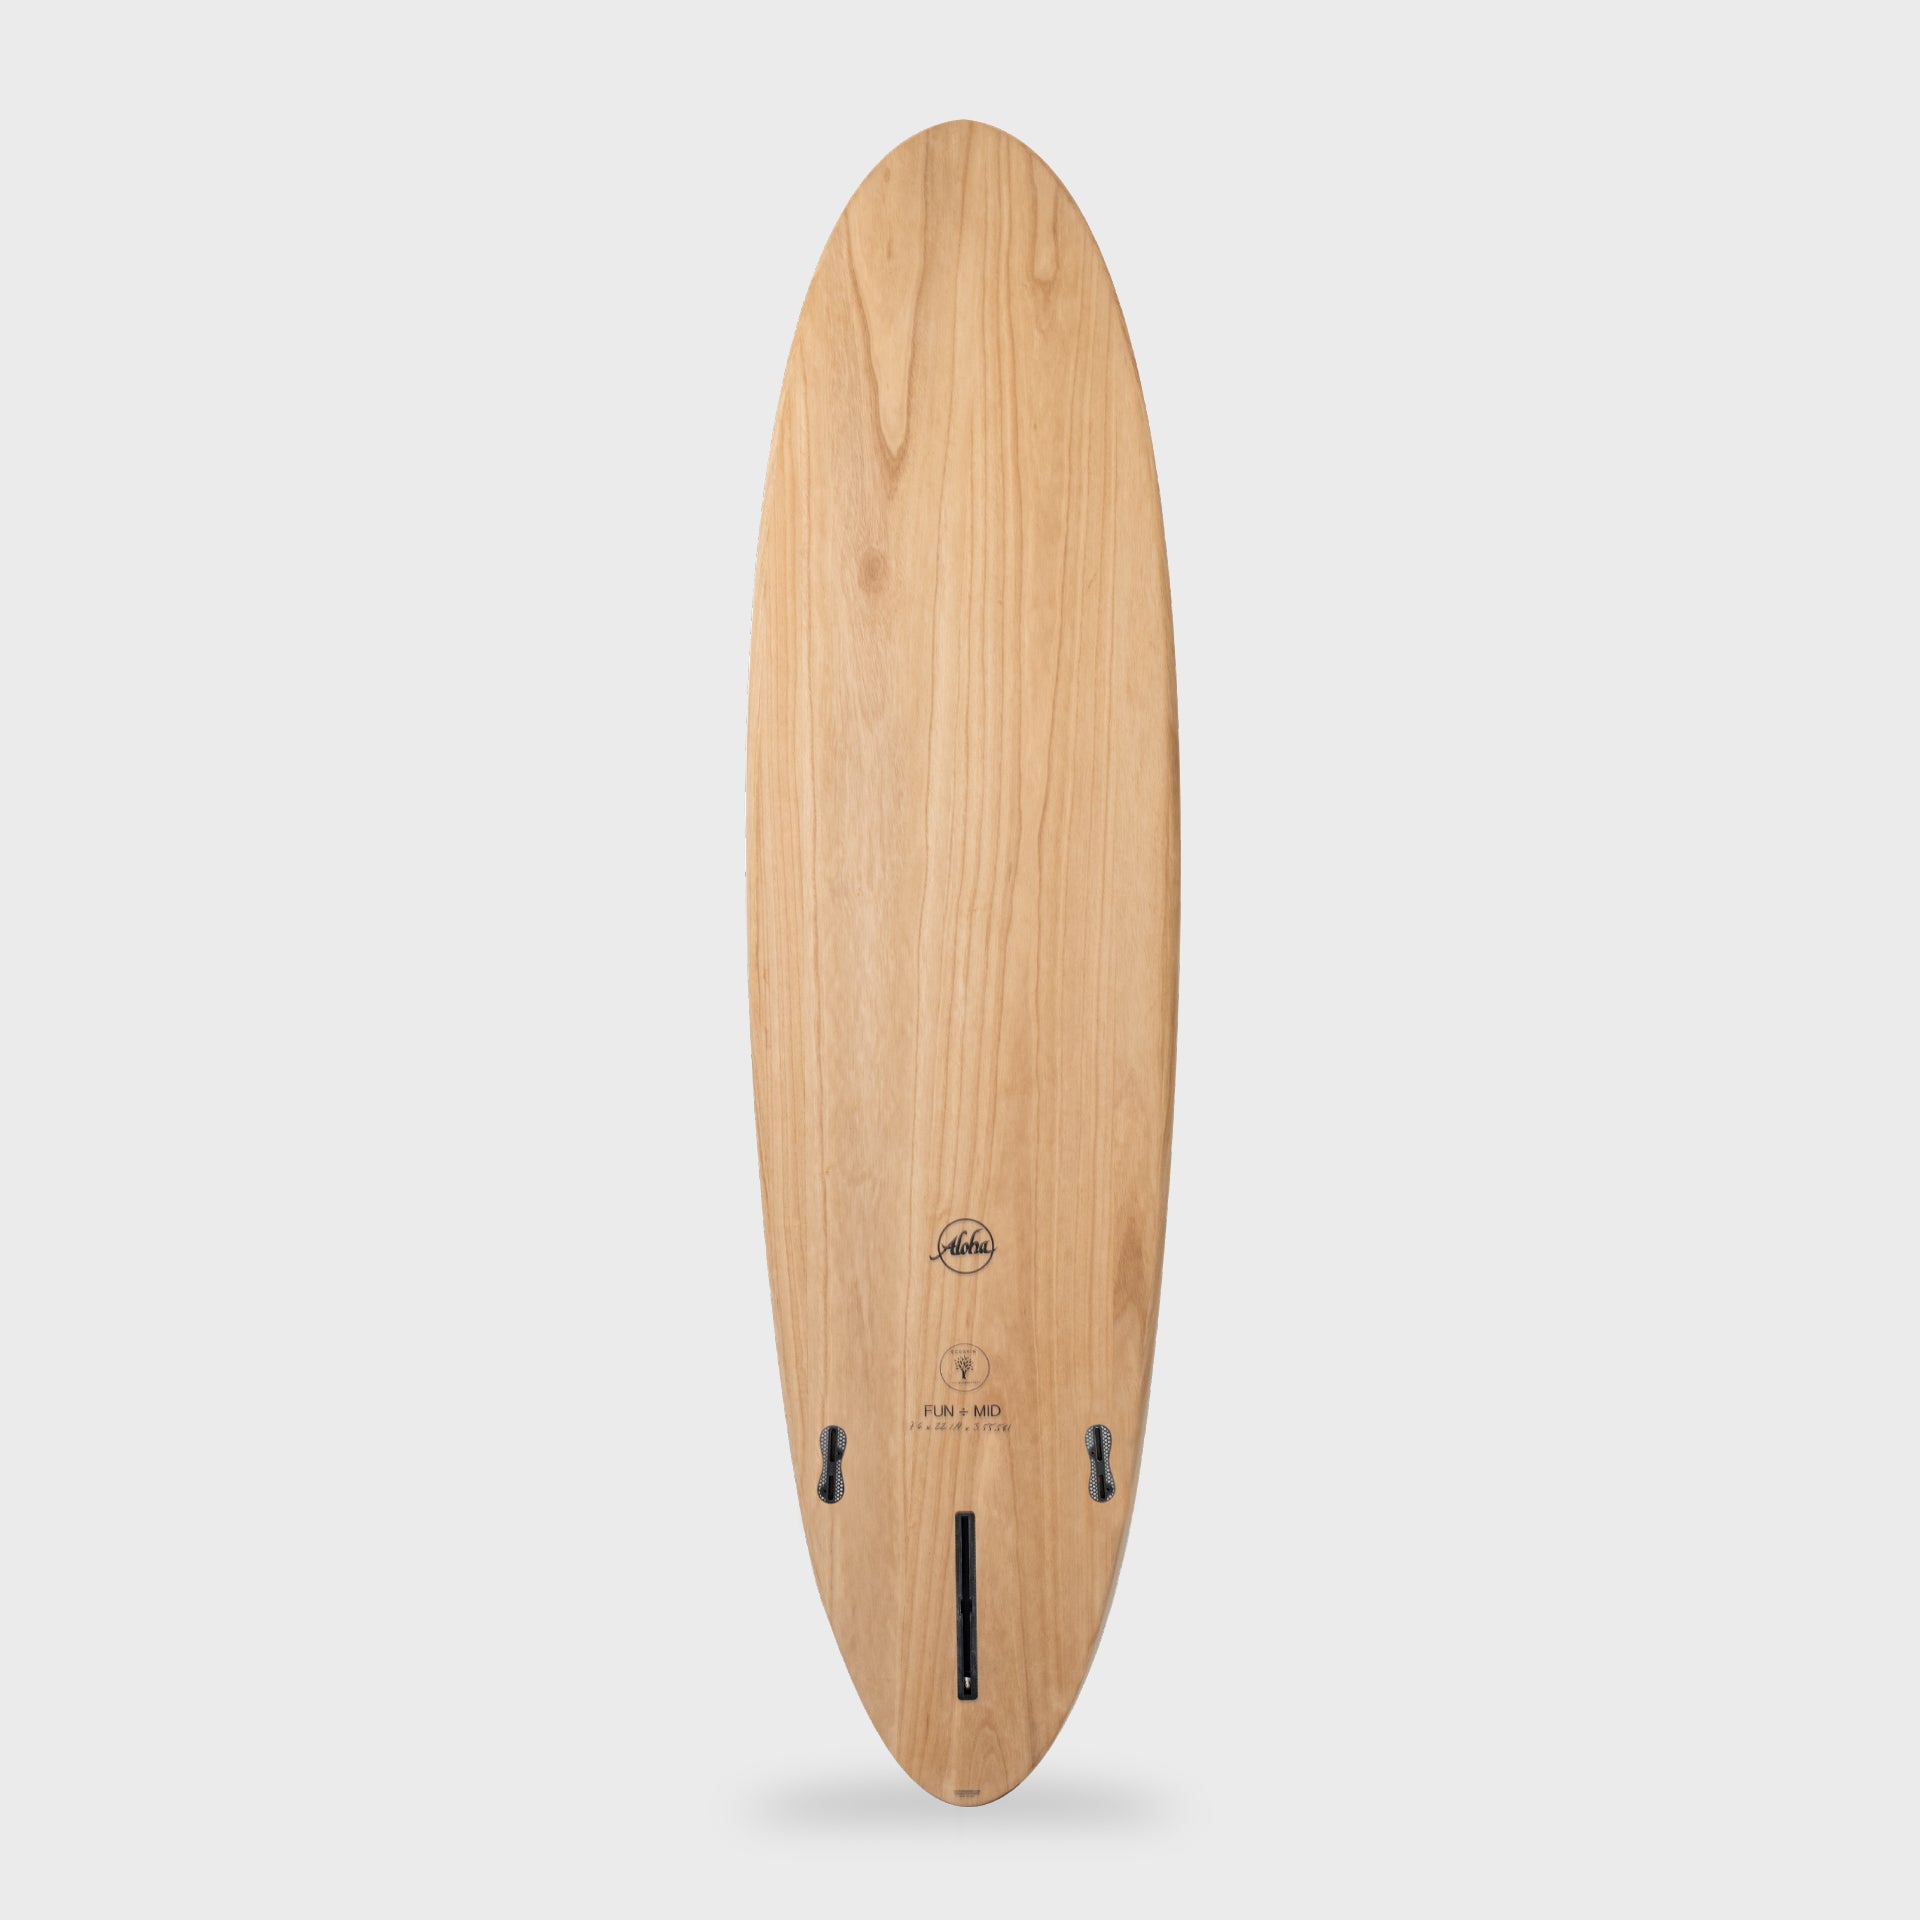 Fun Division Mid Length Ecoskin - 6'8, 7'0, 7'6 and 8'0 - Clear - FCSII - ManGo Surfing